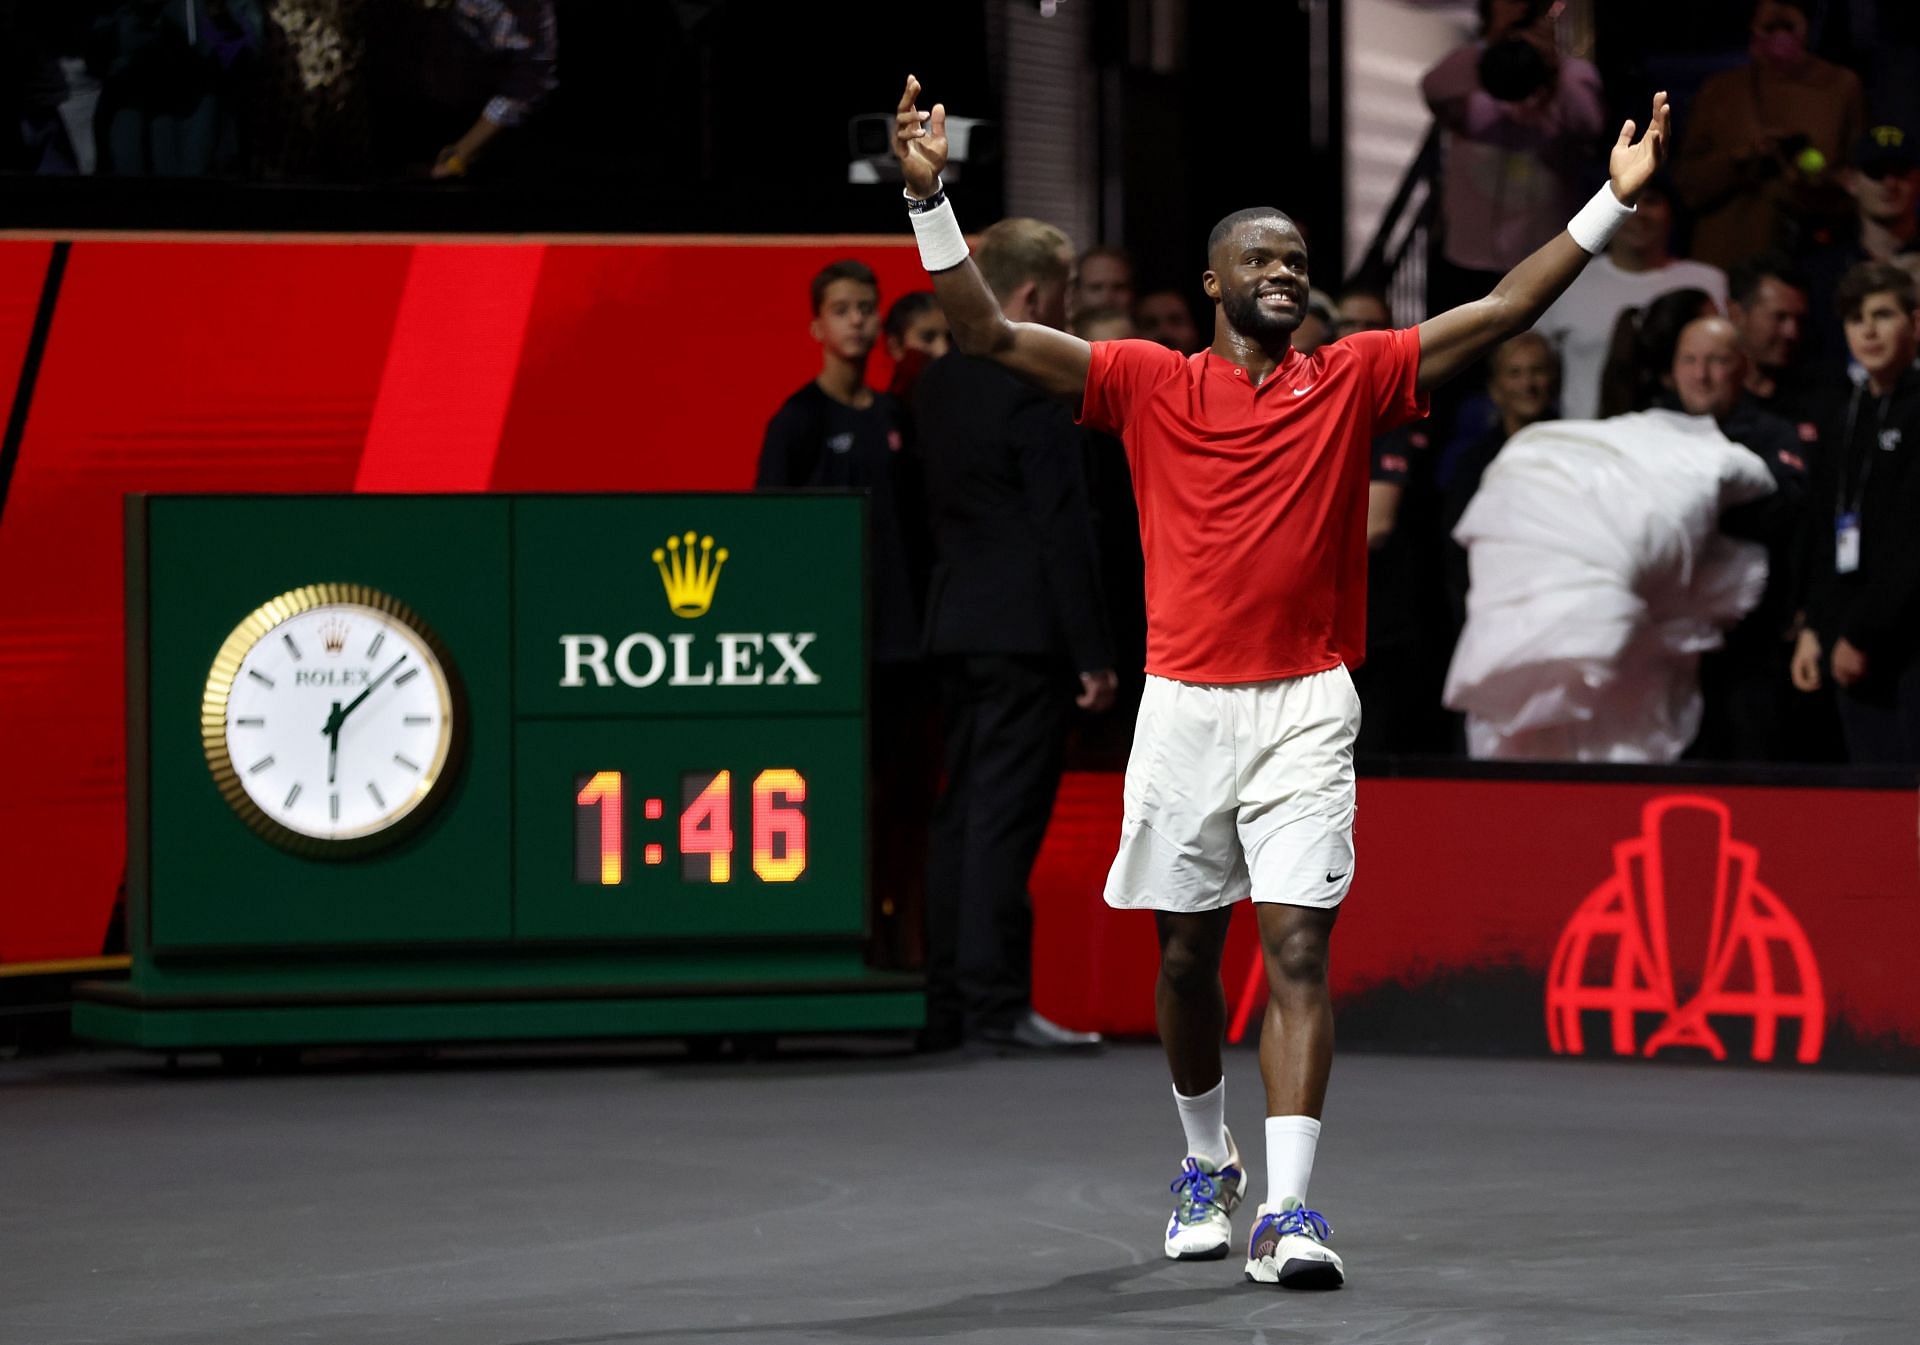 Frances Tiafoe at the 2022 Laver Cup.